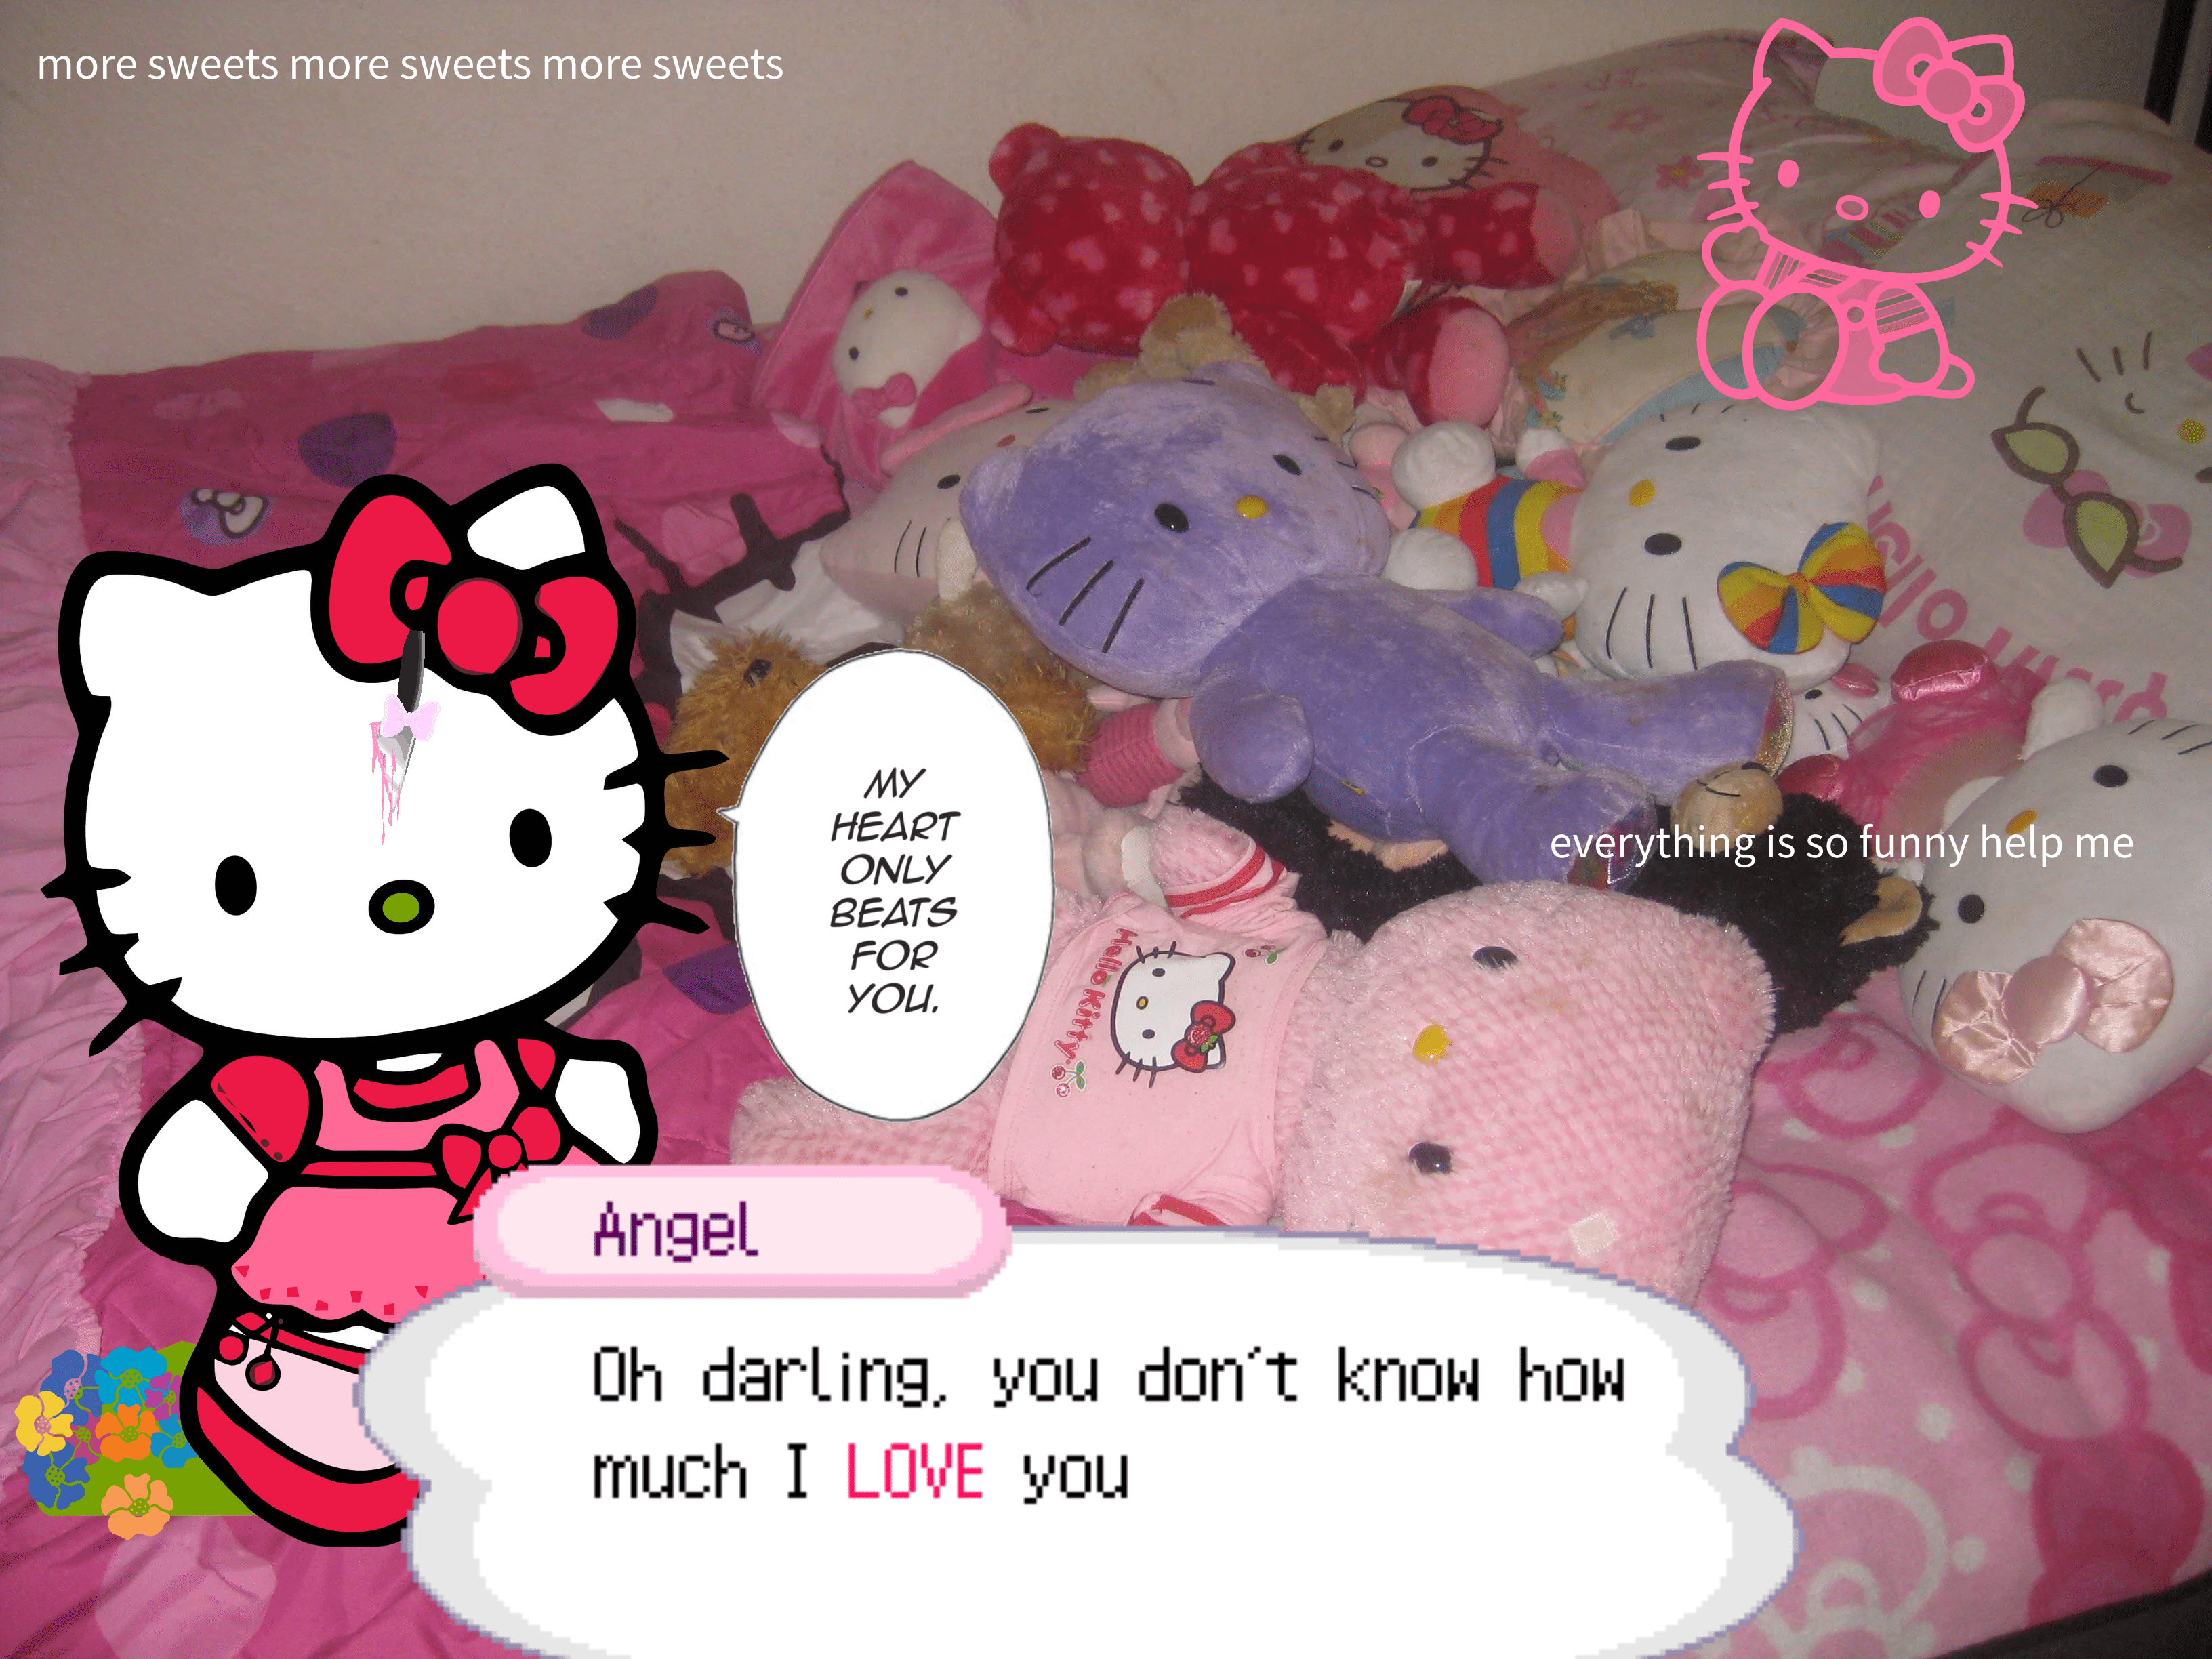 A Hello Kitty doll is sitting on a bed with a note that says 